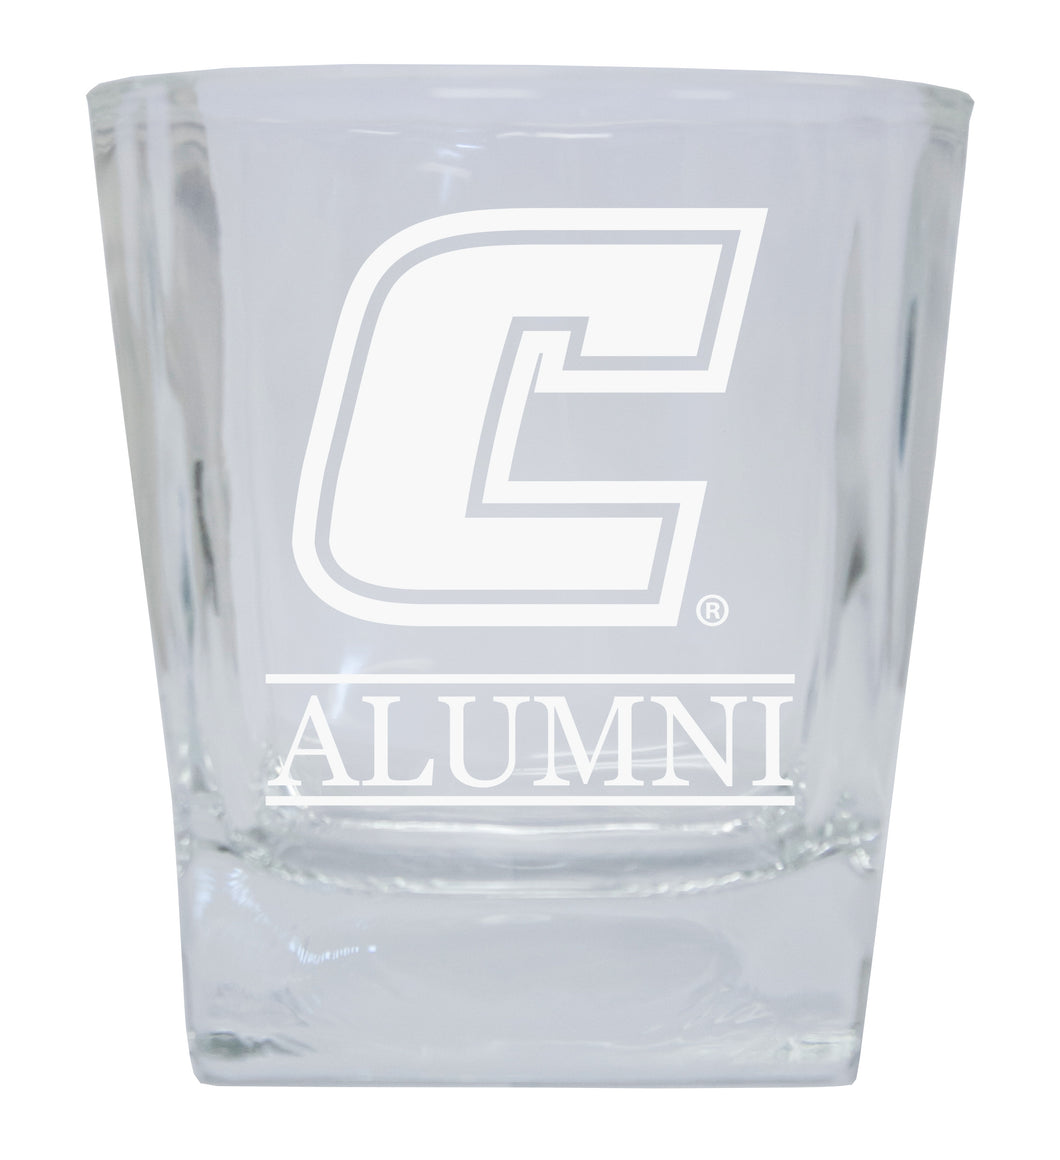 University of Tennessee at Chattanooga Alumni Elegance - 5 oz Etched Shooter Glass Tumbler 4-Pack